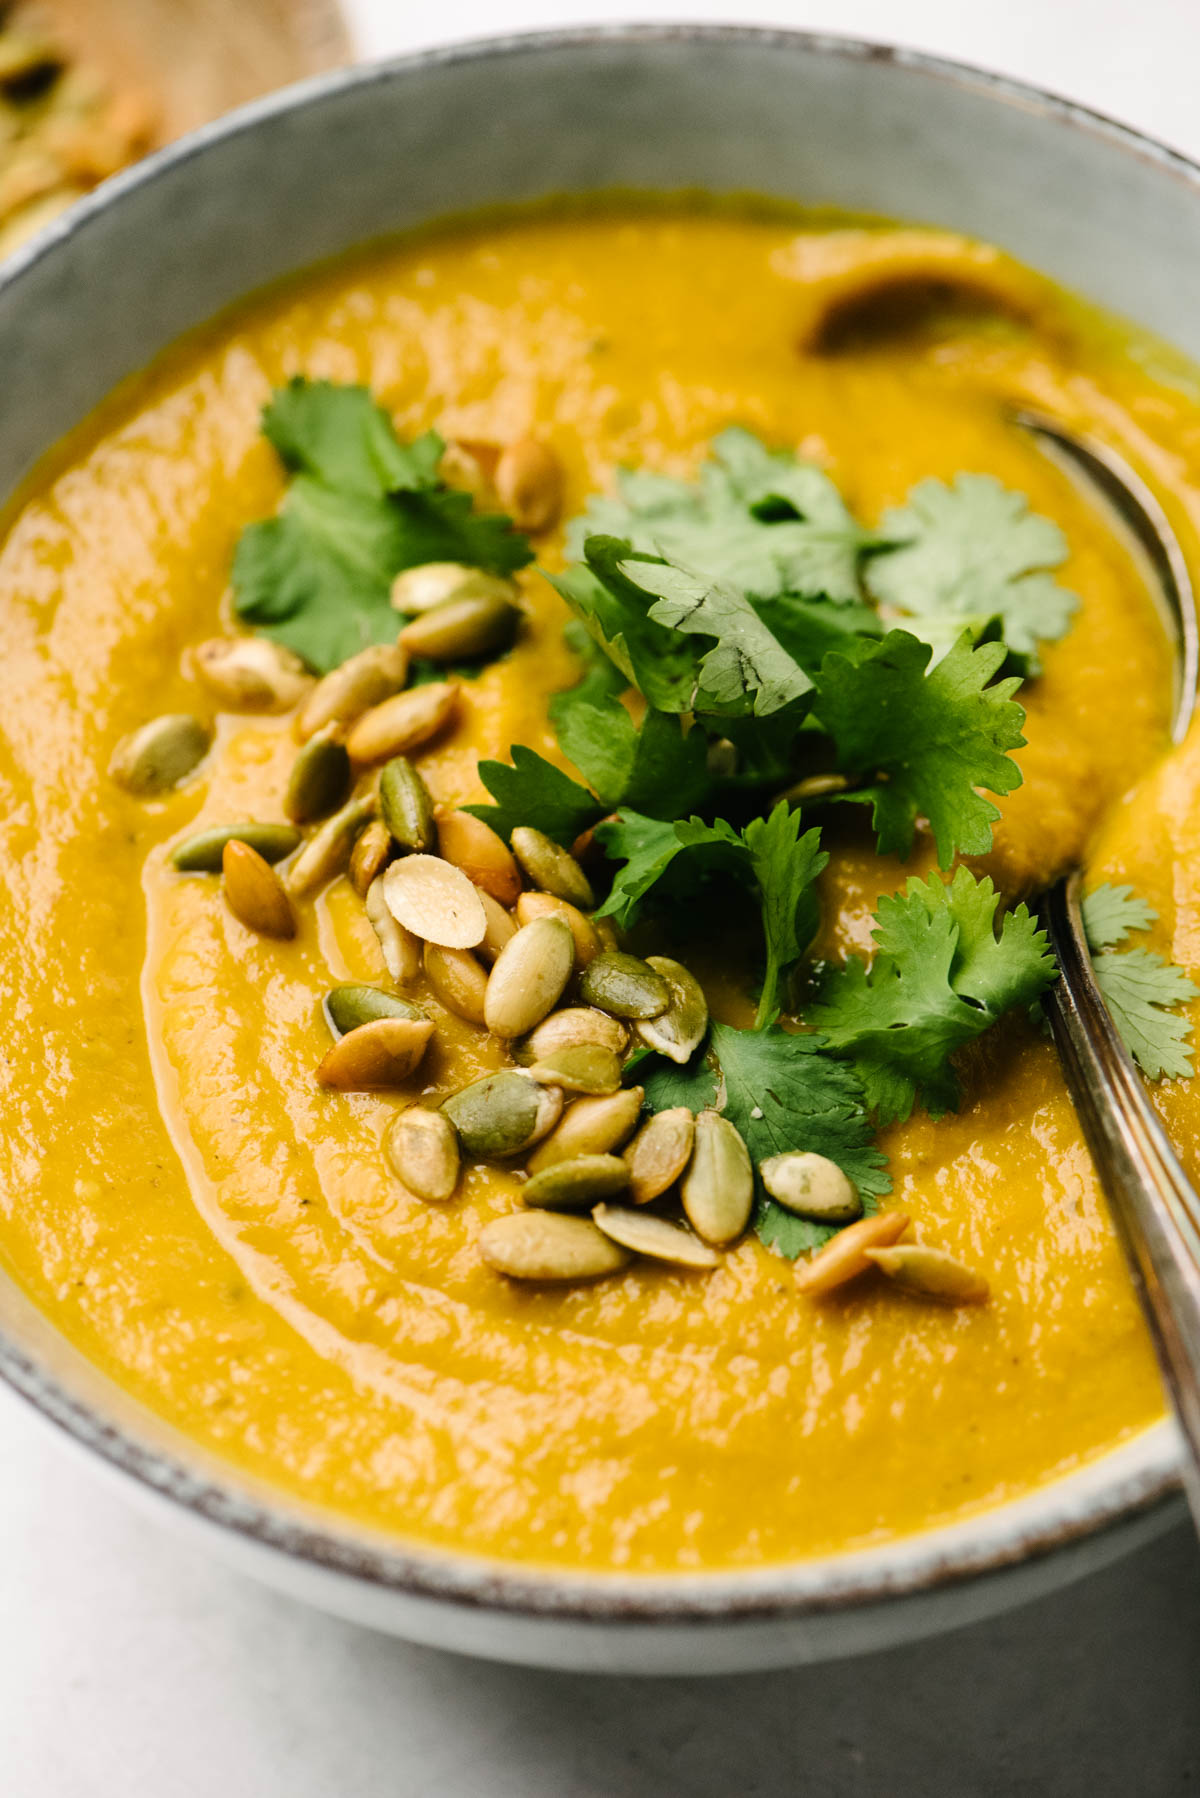 Side view, a soup spoon tucked into a bowl of pumpkin soup with curry, garnished with pepitas and fresh cilantro.